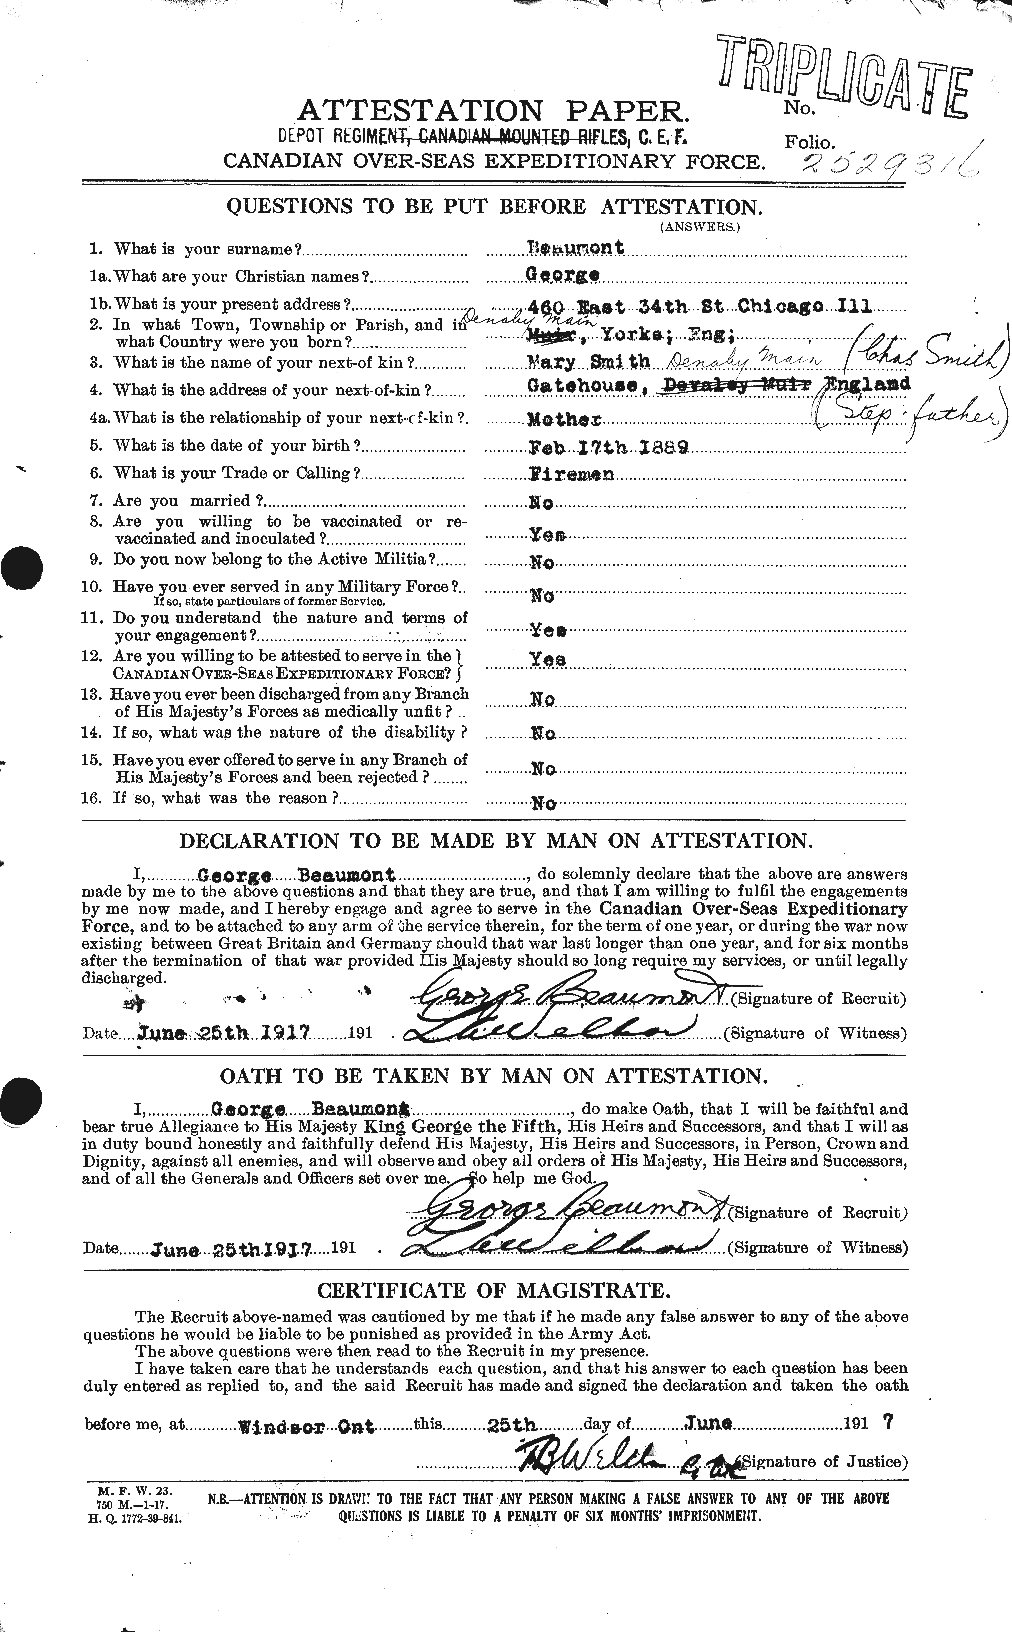 Personnel Records of the First World War - CEF 231662a